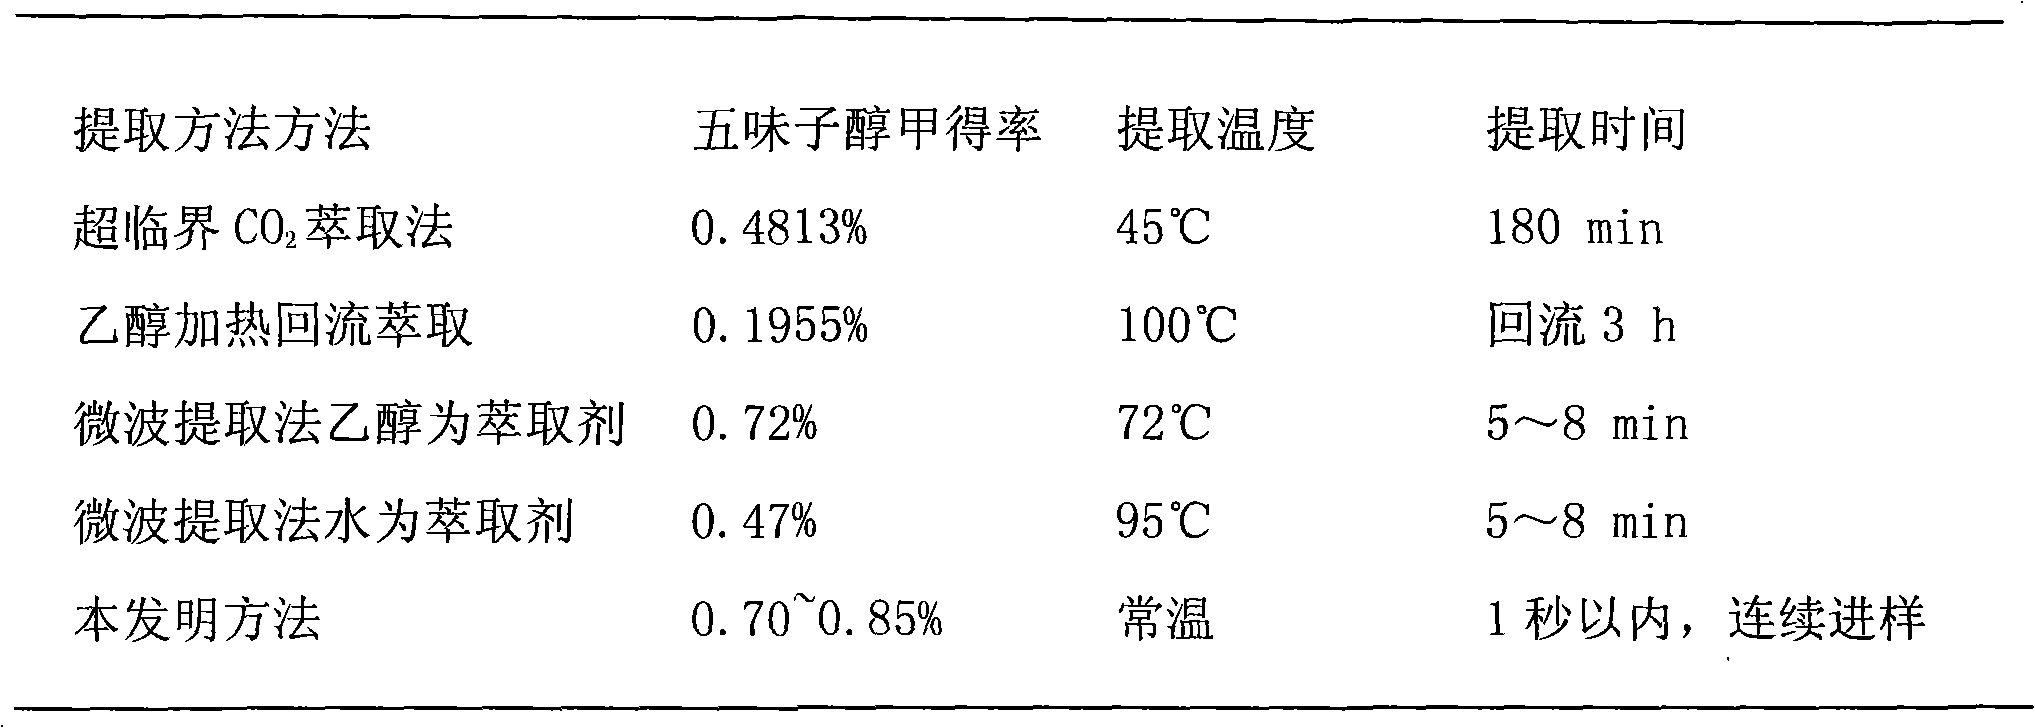 Method for producing schisandra extract by adopting high voltage pulse electric field technology